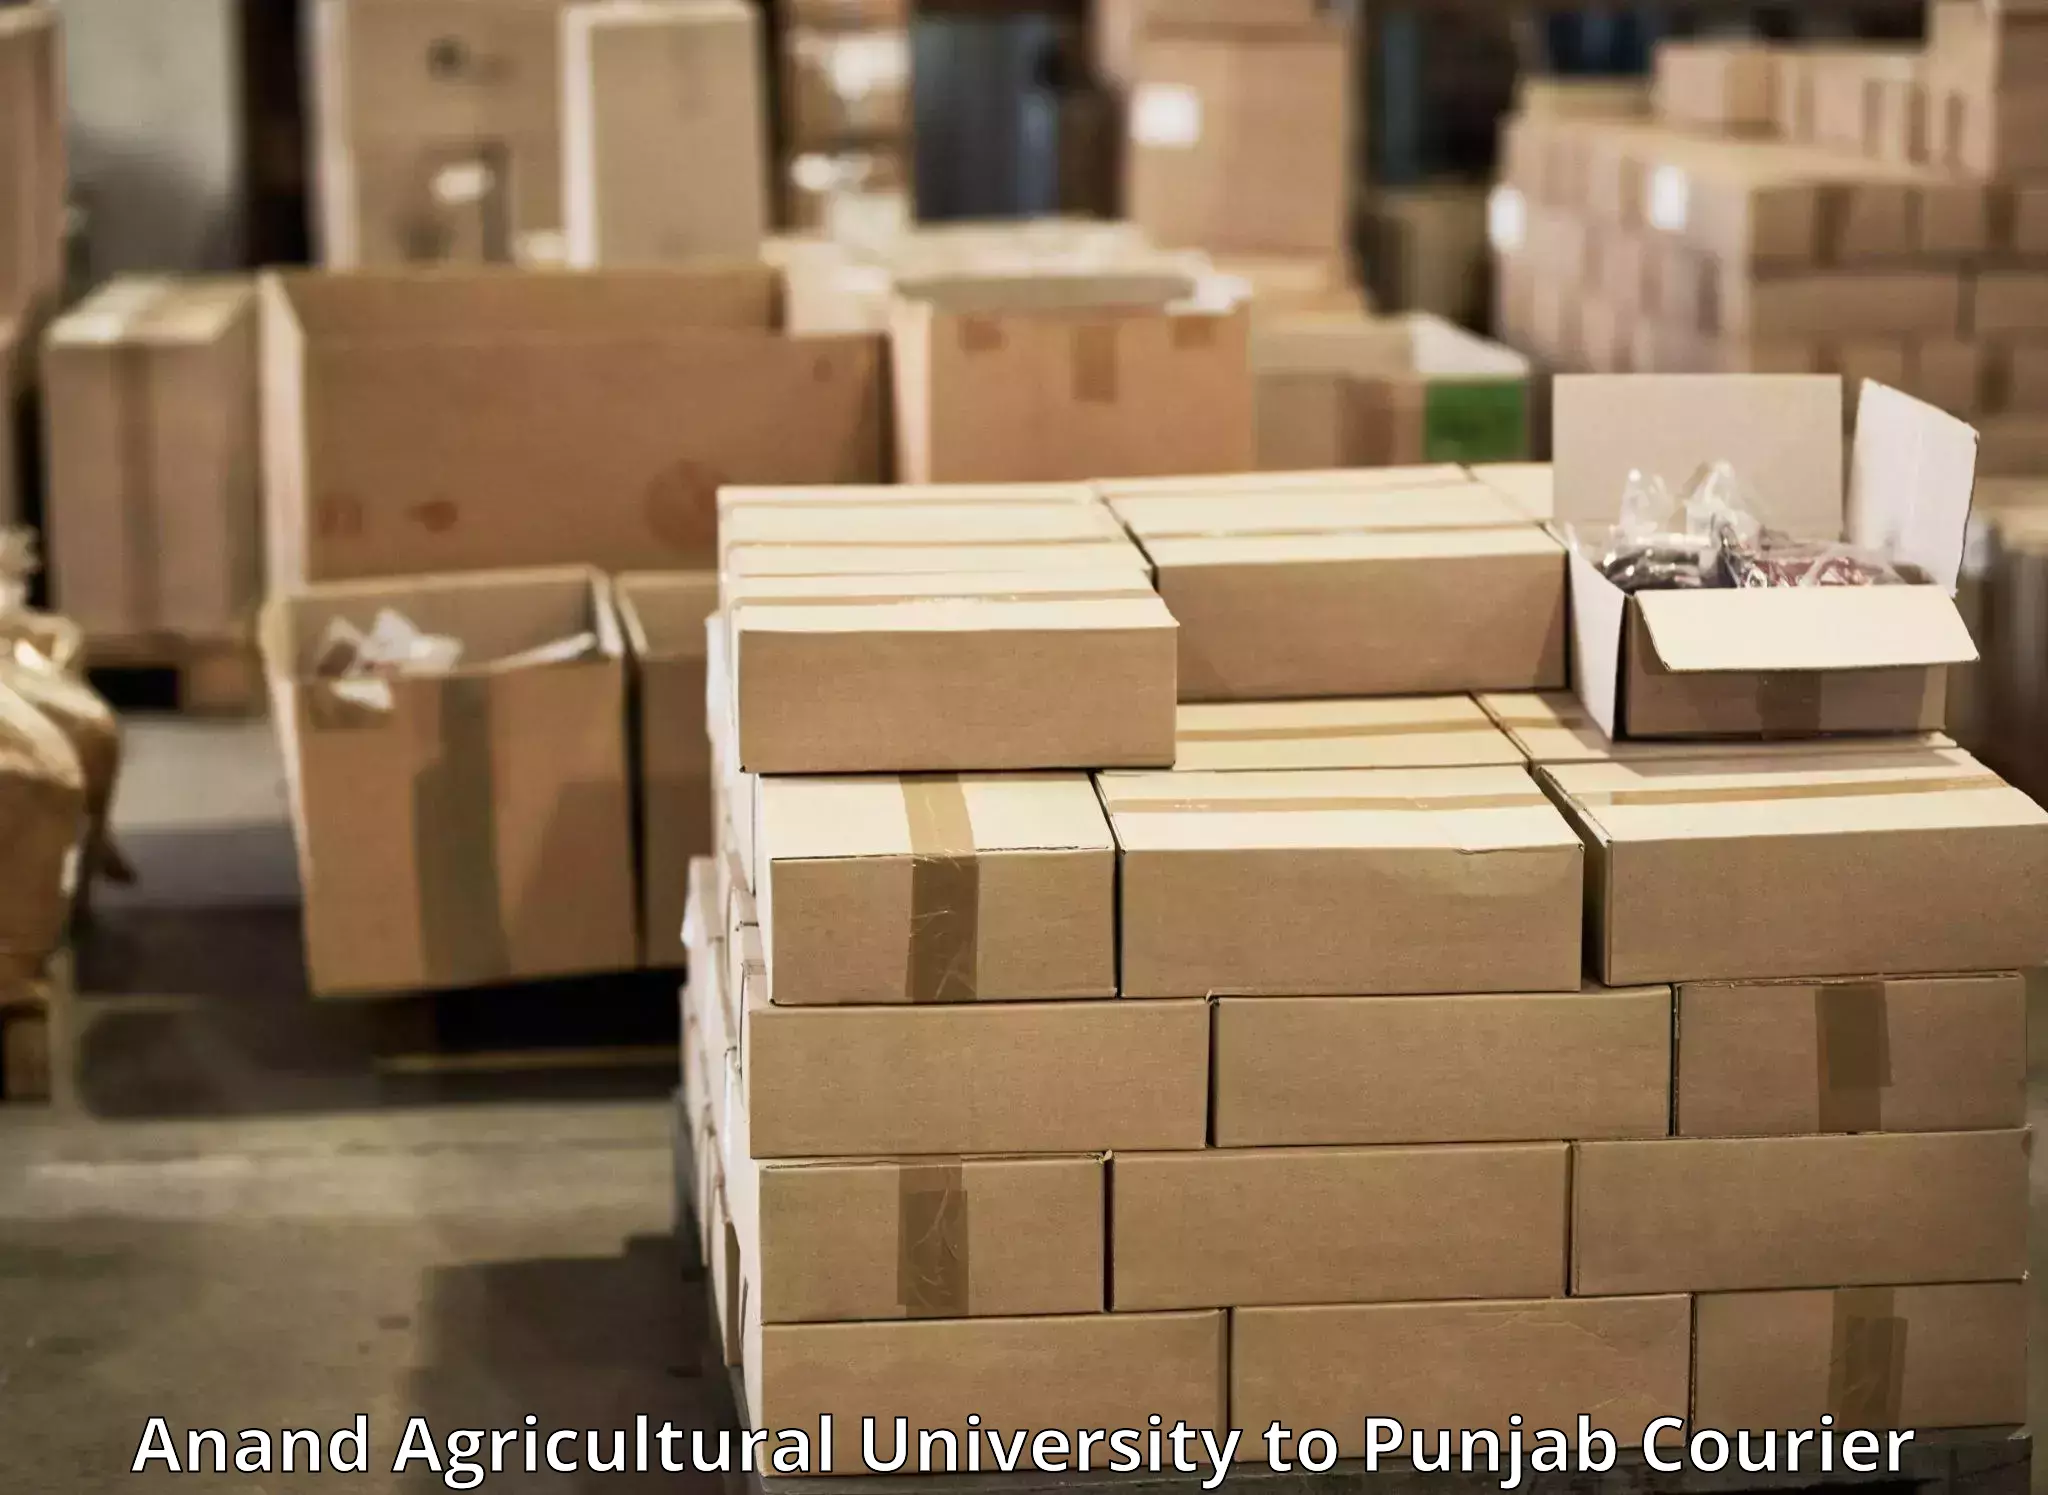 Personalized courier experiences Anand Agricultural University to Punjab